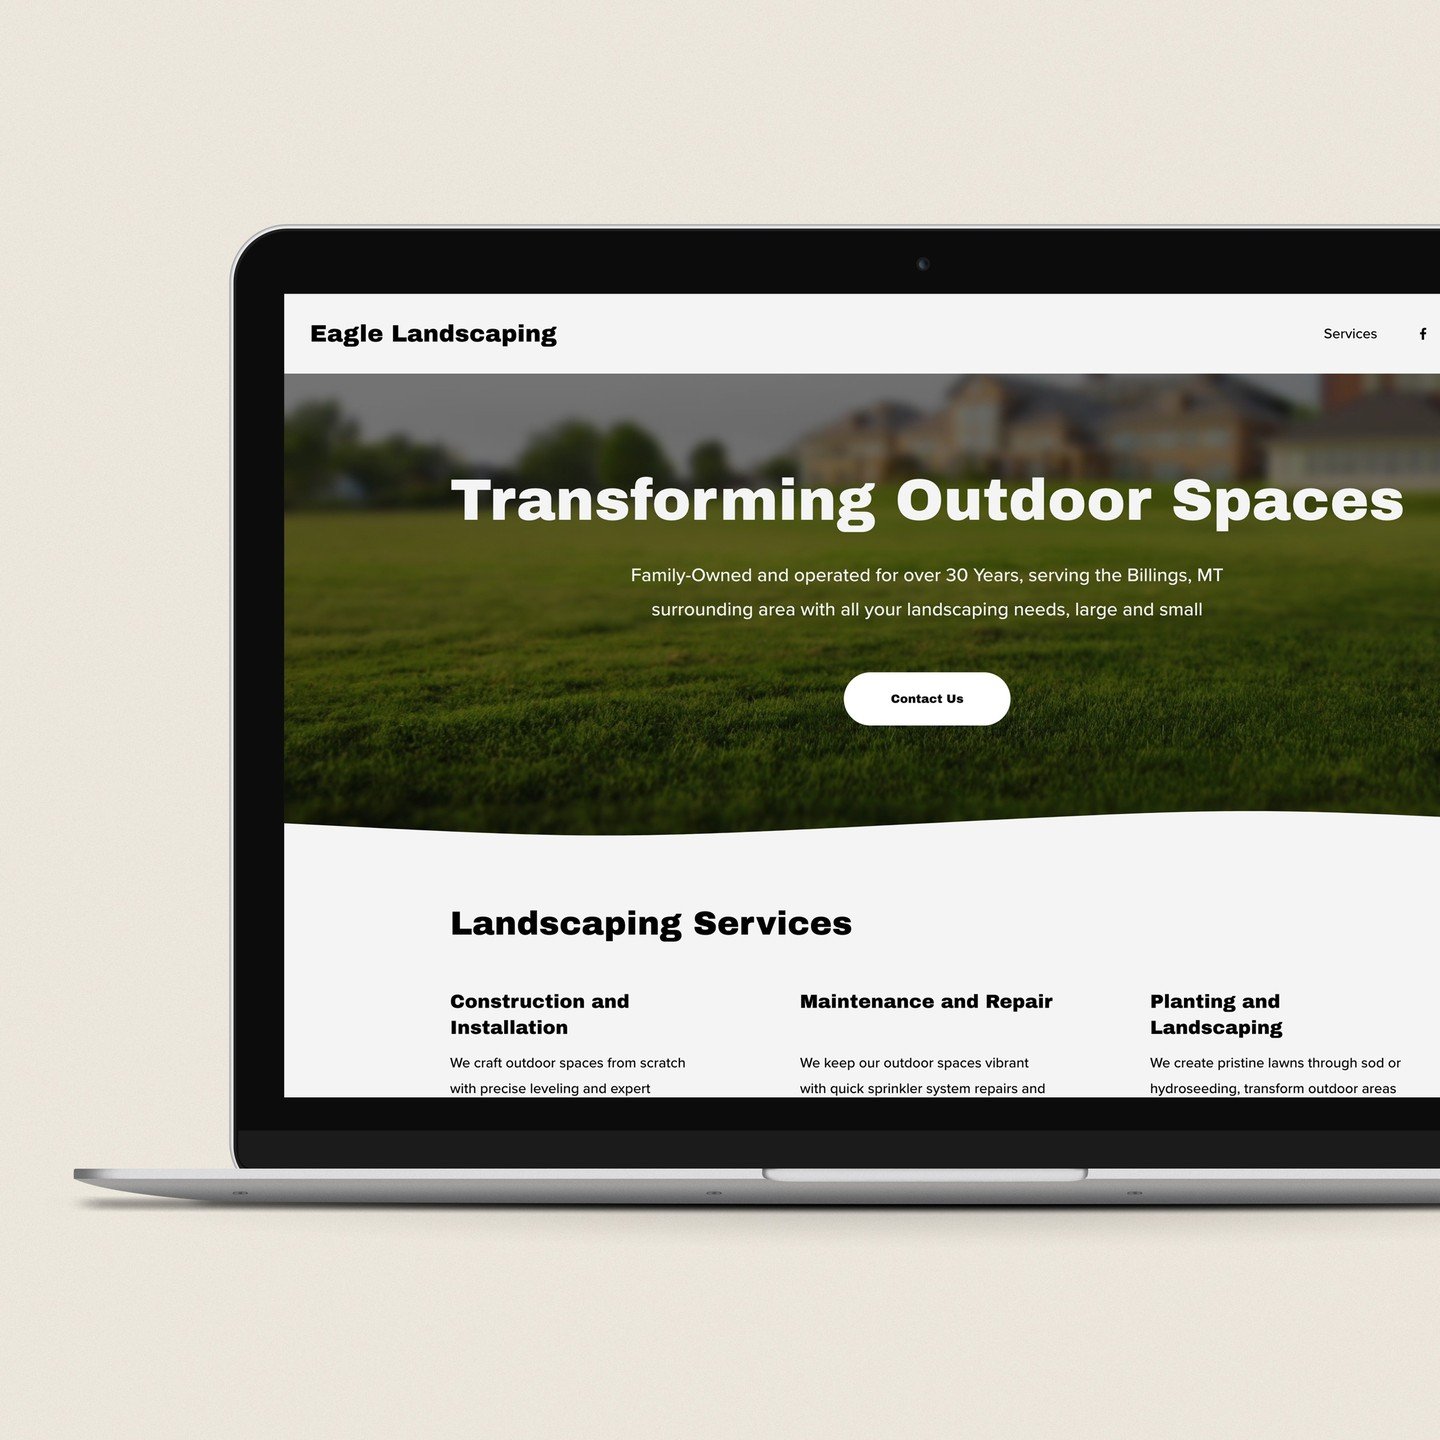 Eagle Landscaping has been family-owned and operated for over 30 years and loves transforming your outdoor spaces, whether large or small! 

Quick Launch Websites are perfect for local businesses eager to promote their services without a lengthy proc